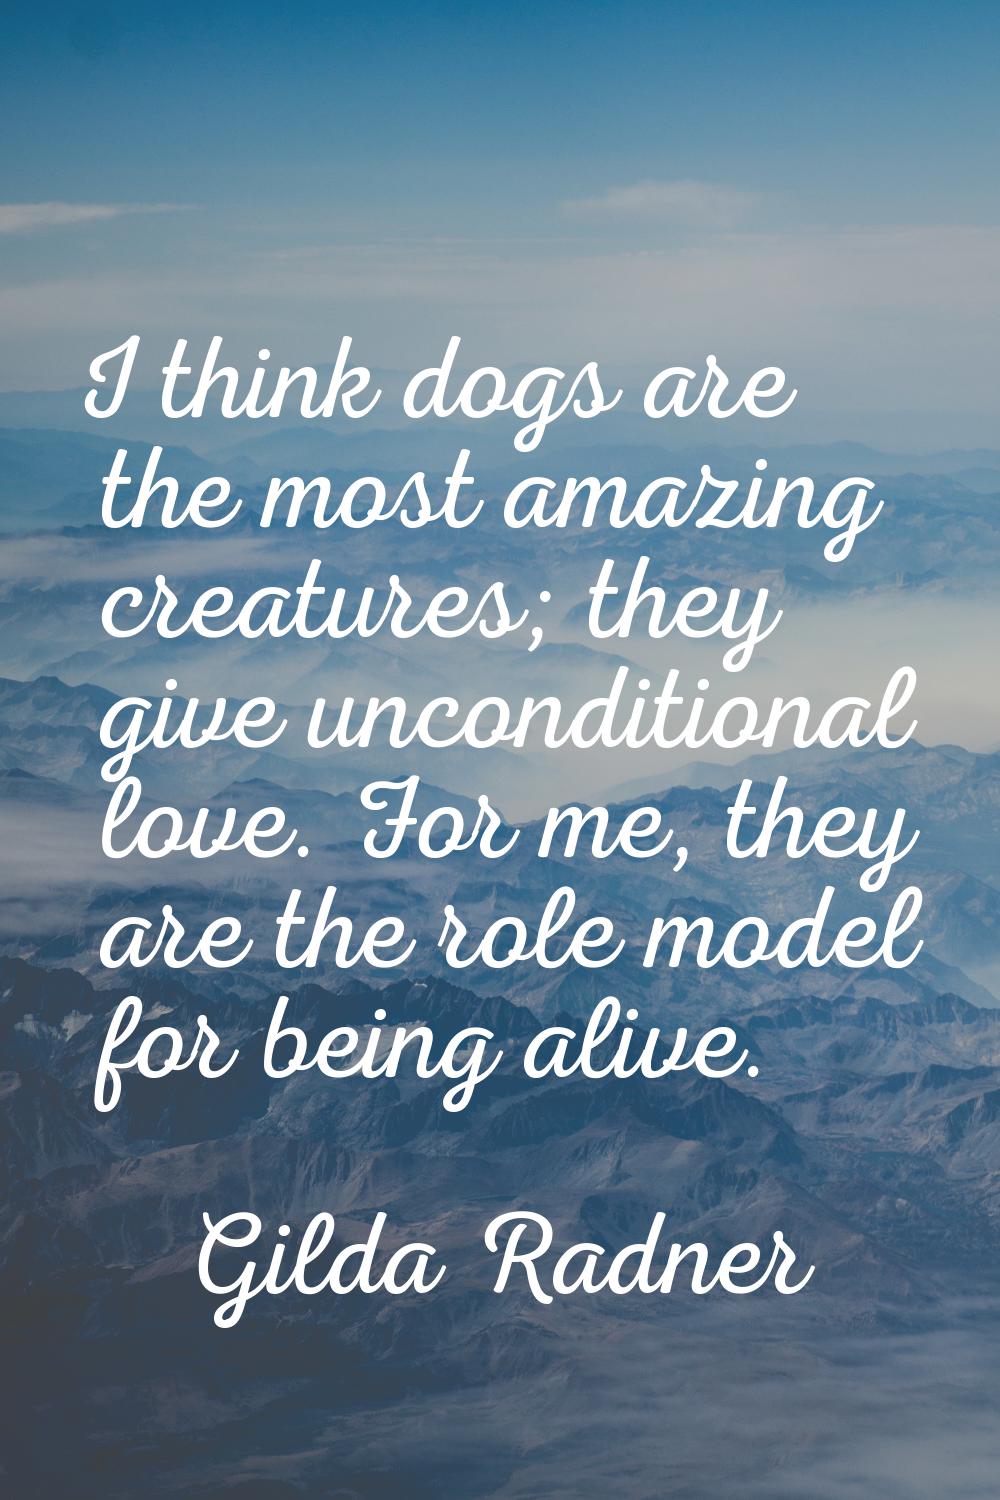 I think dogs are the most amazing creatures; they give unconditional love. For me, they are the rol